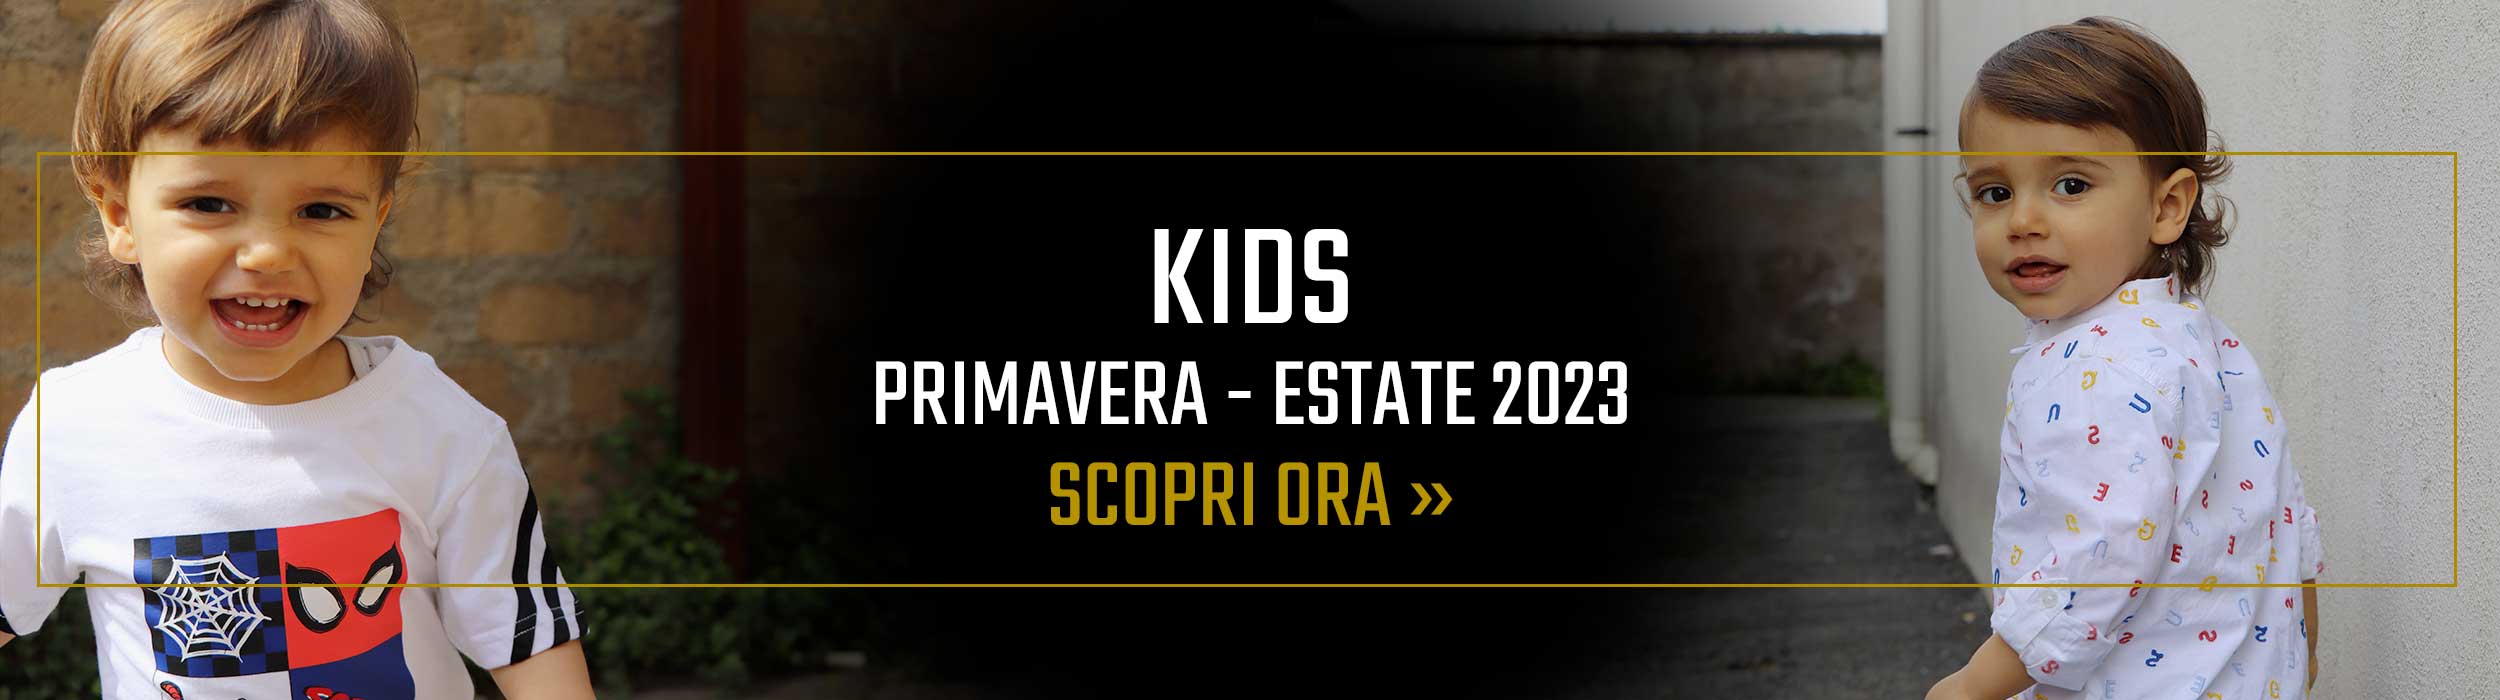 New Collection PE 2023 - Kids